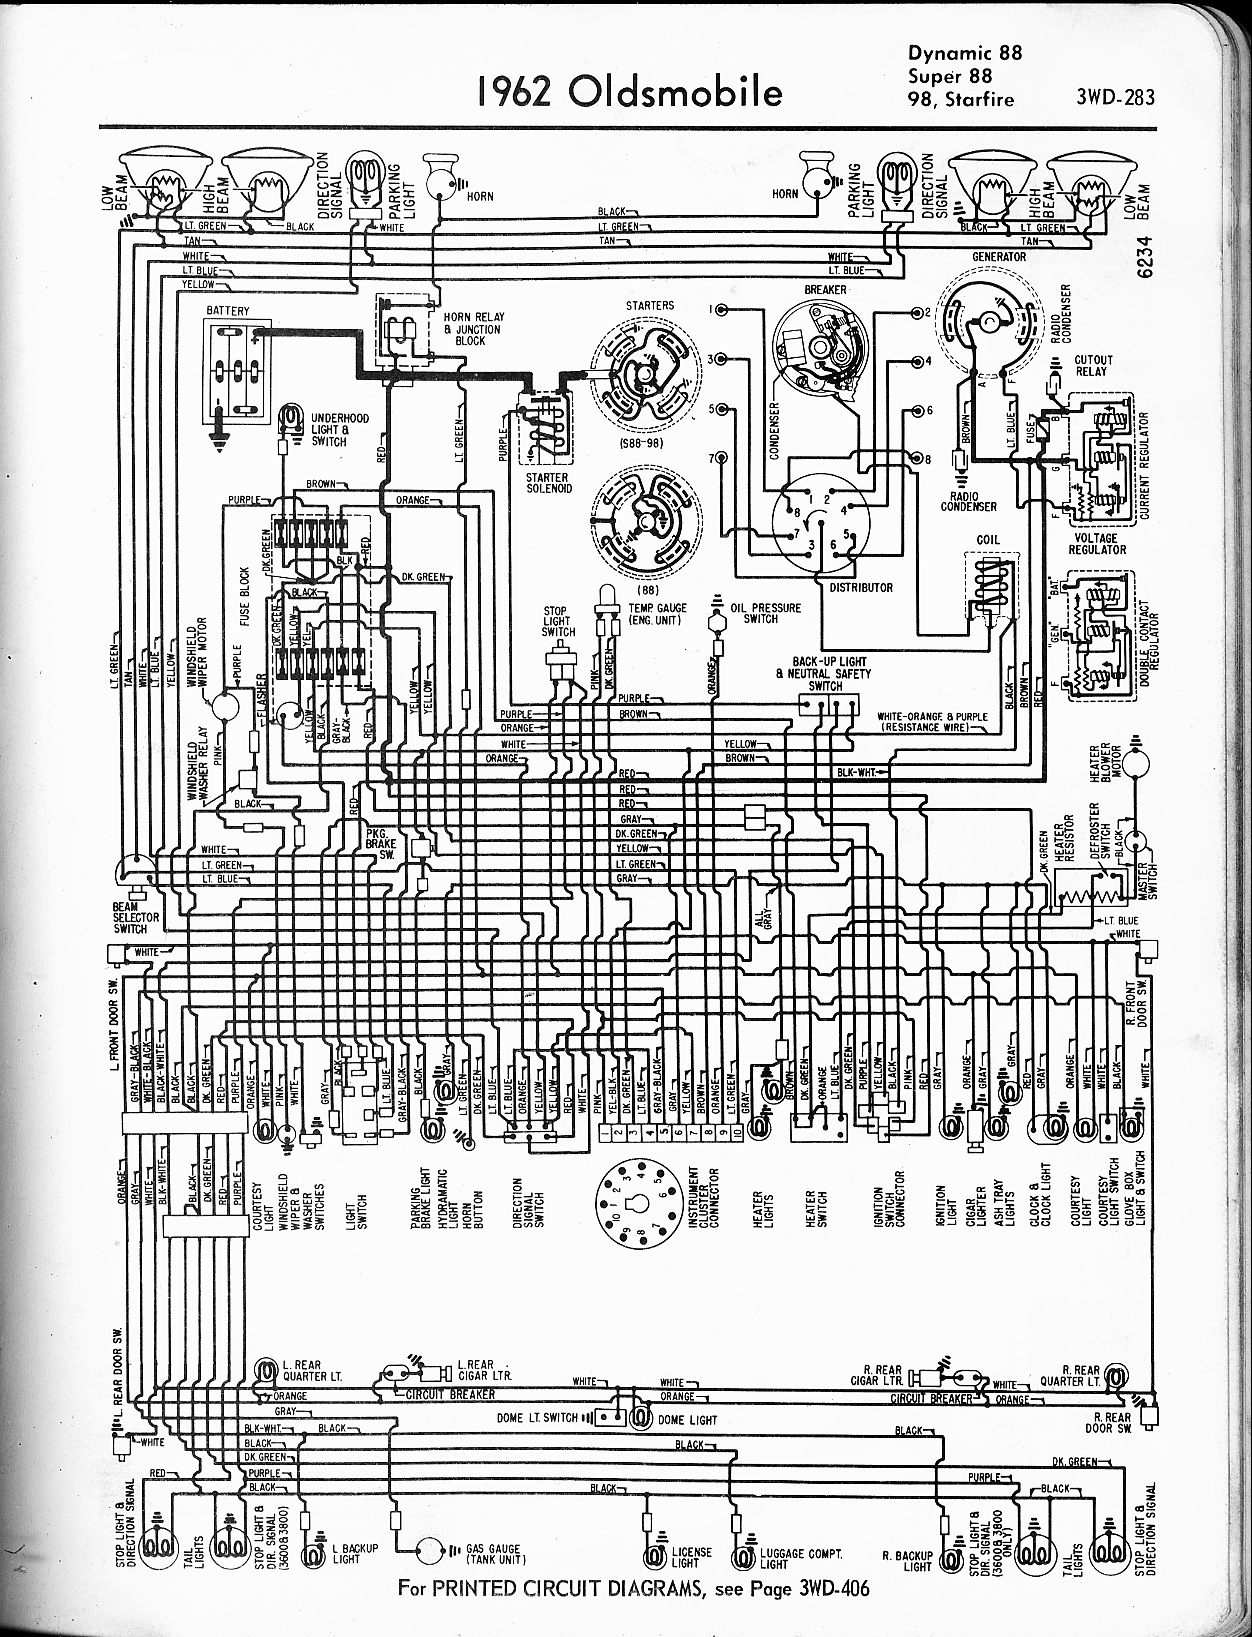 Oldsmobile wiring diagrams - The Old Car Manual Project old schematic wiring 